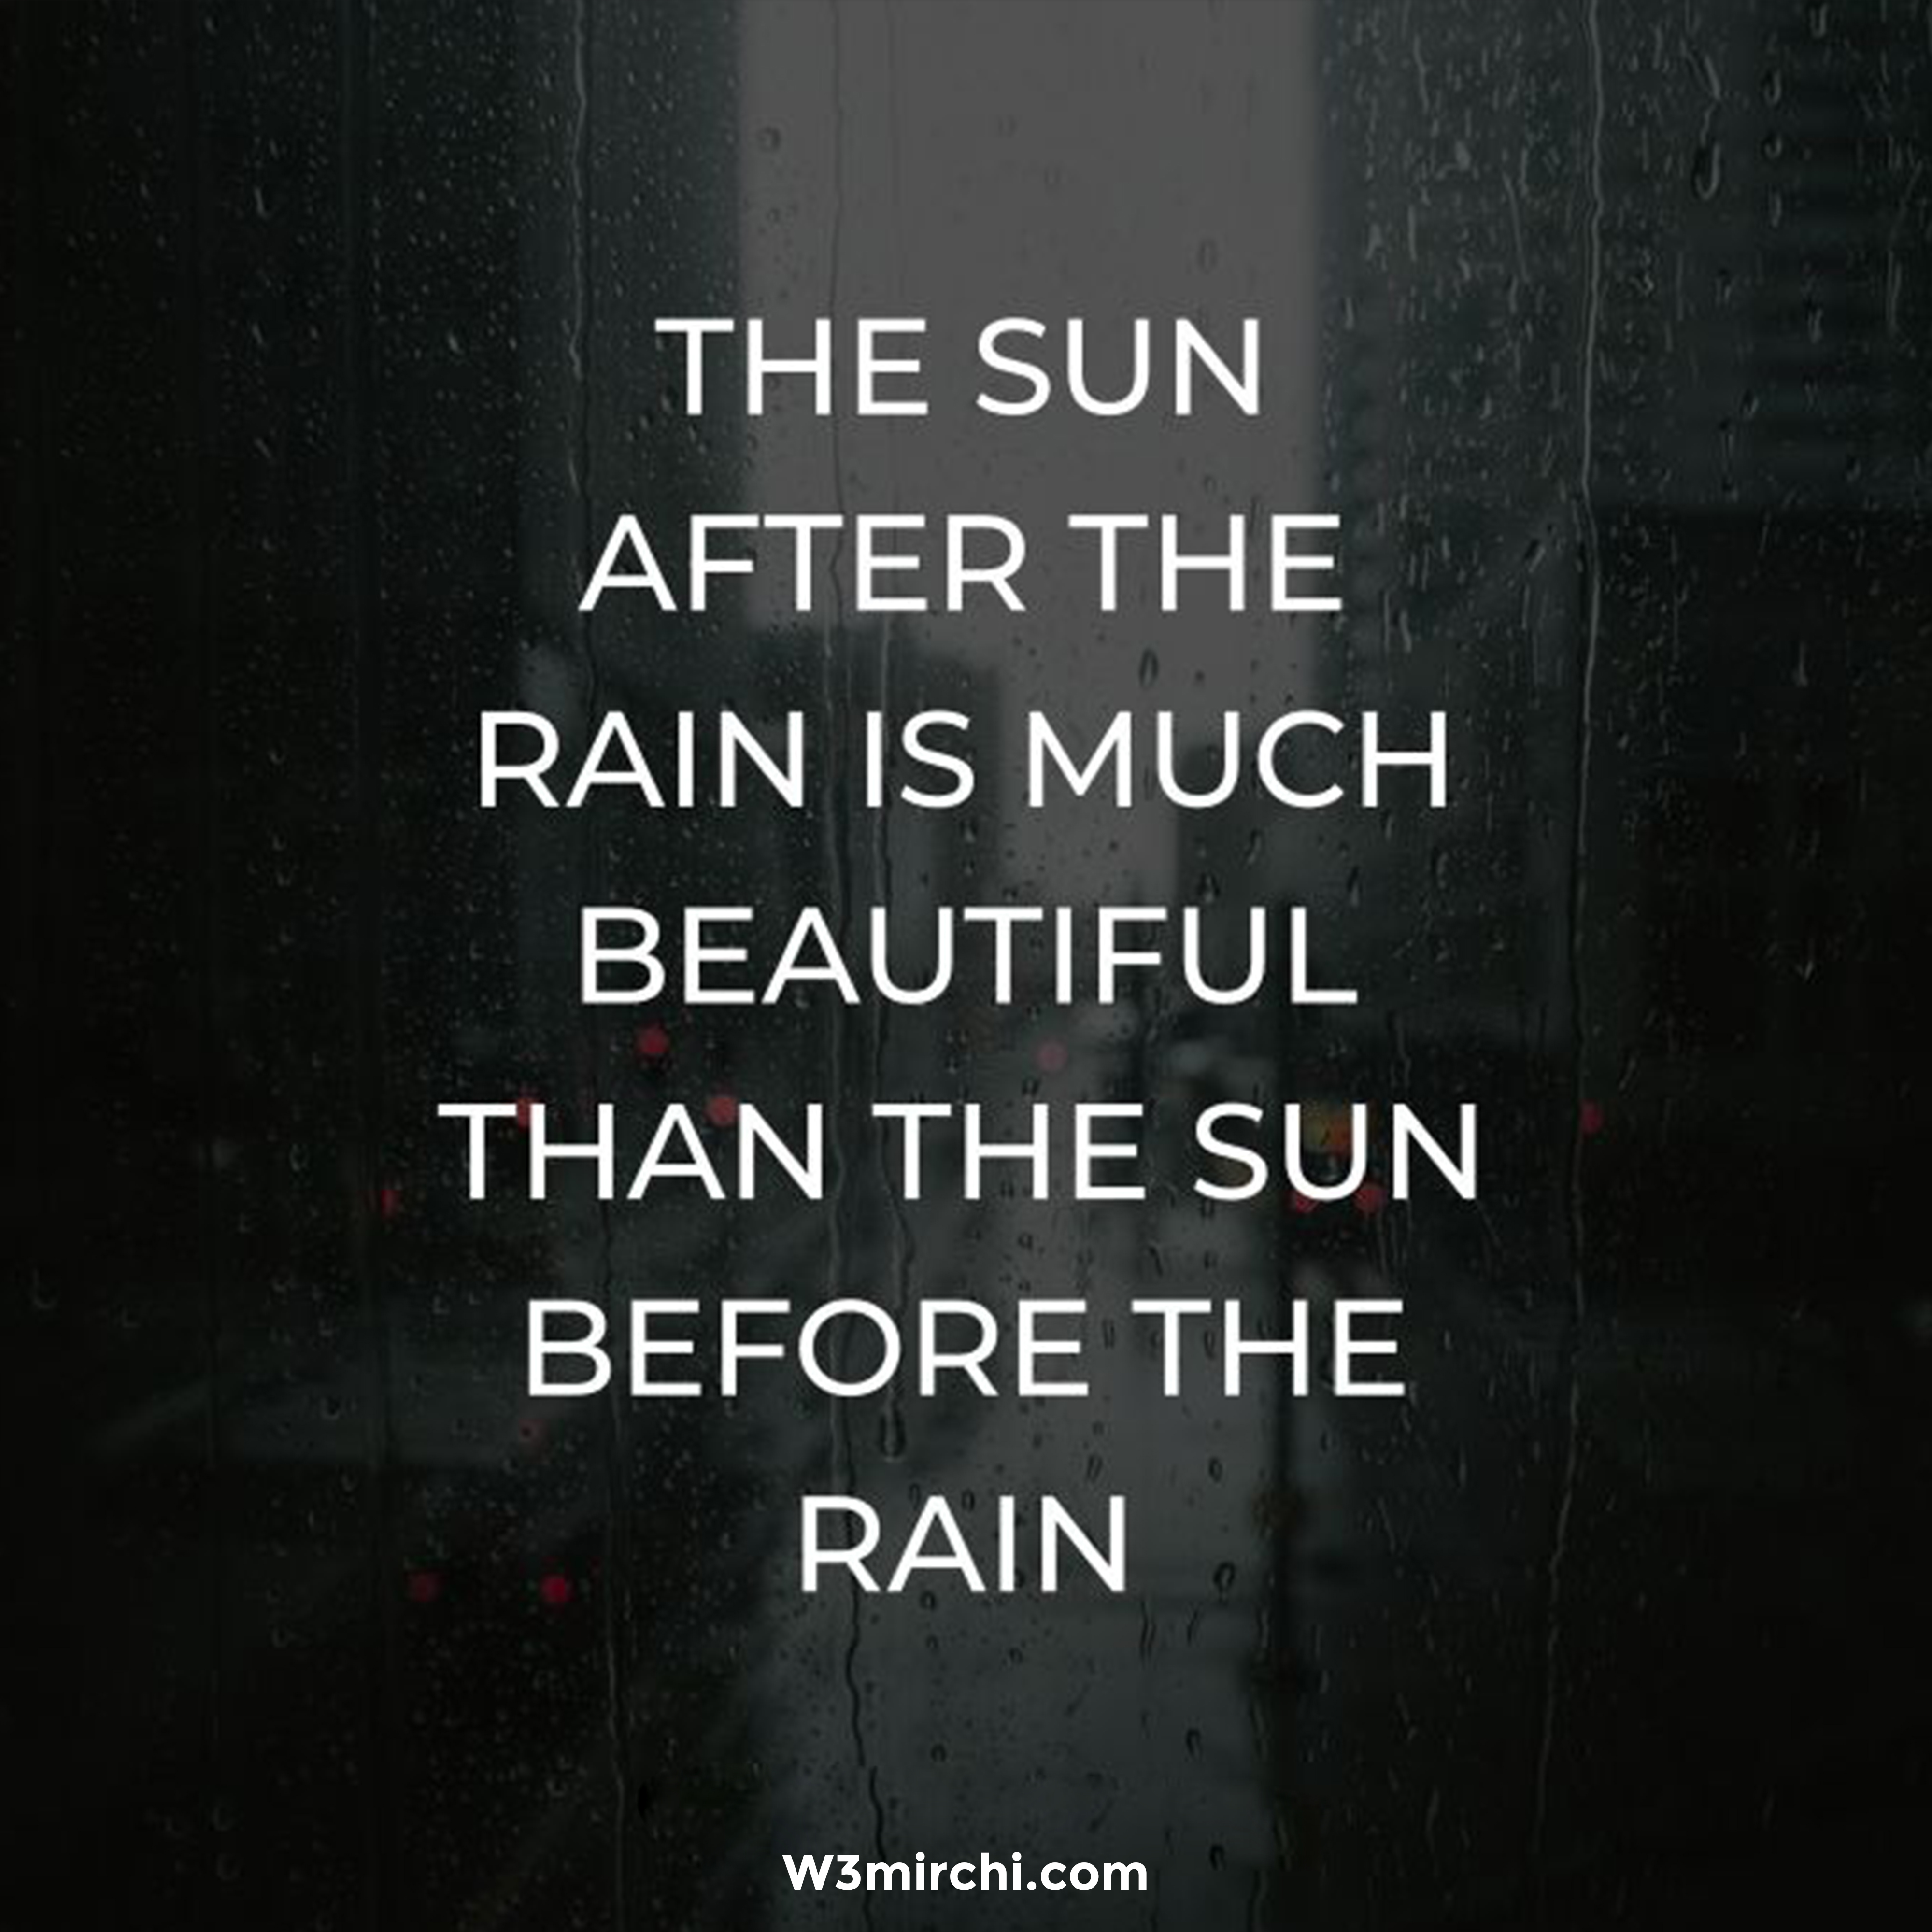 The sun after the rain is much beautiful